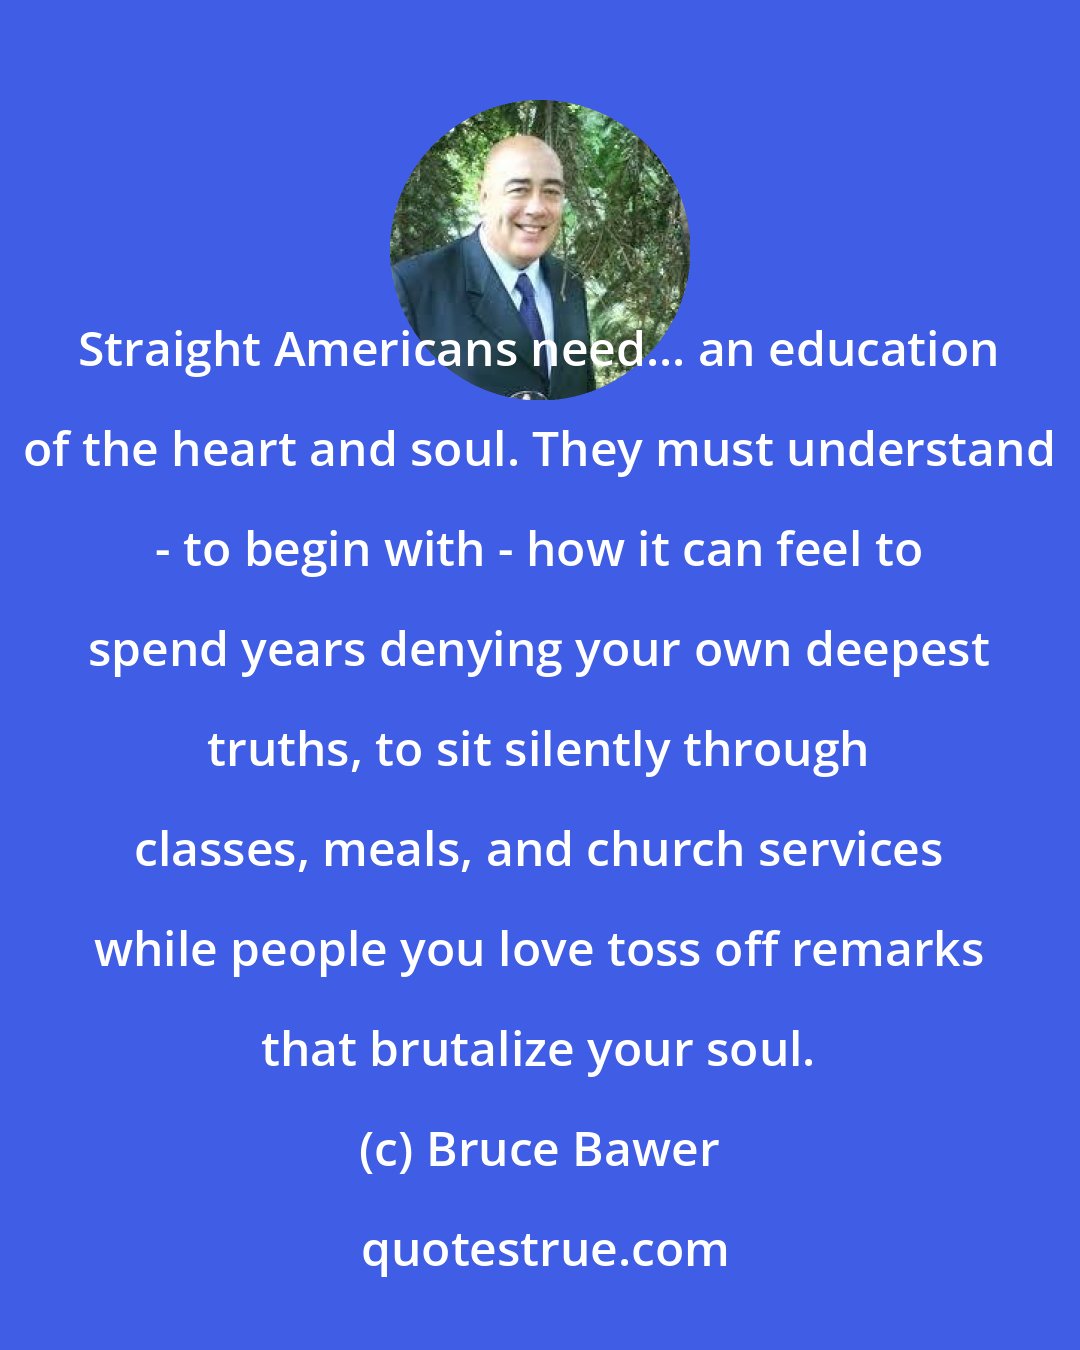 Bruce Bawer: Straight Americans need... an education of the heart and soul. They must understand - to begin with - how it can feel to spend years denying your own deepest truths, to sit silently through classes, meals, and church services while people you love toss off remarks that brutalize your soul.